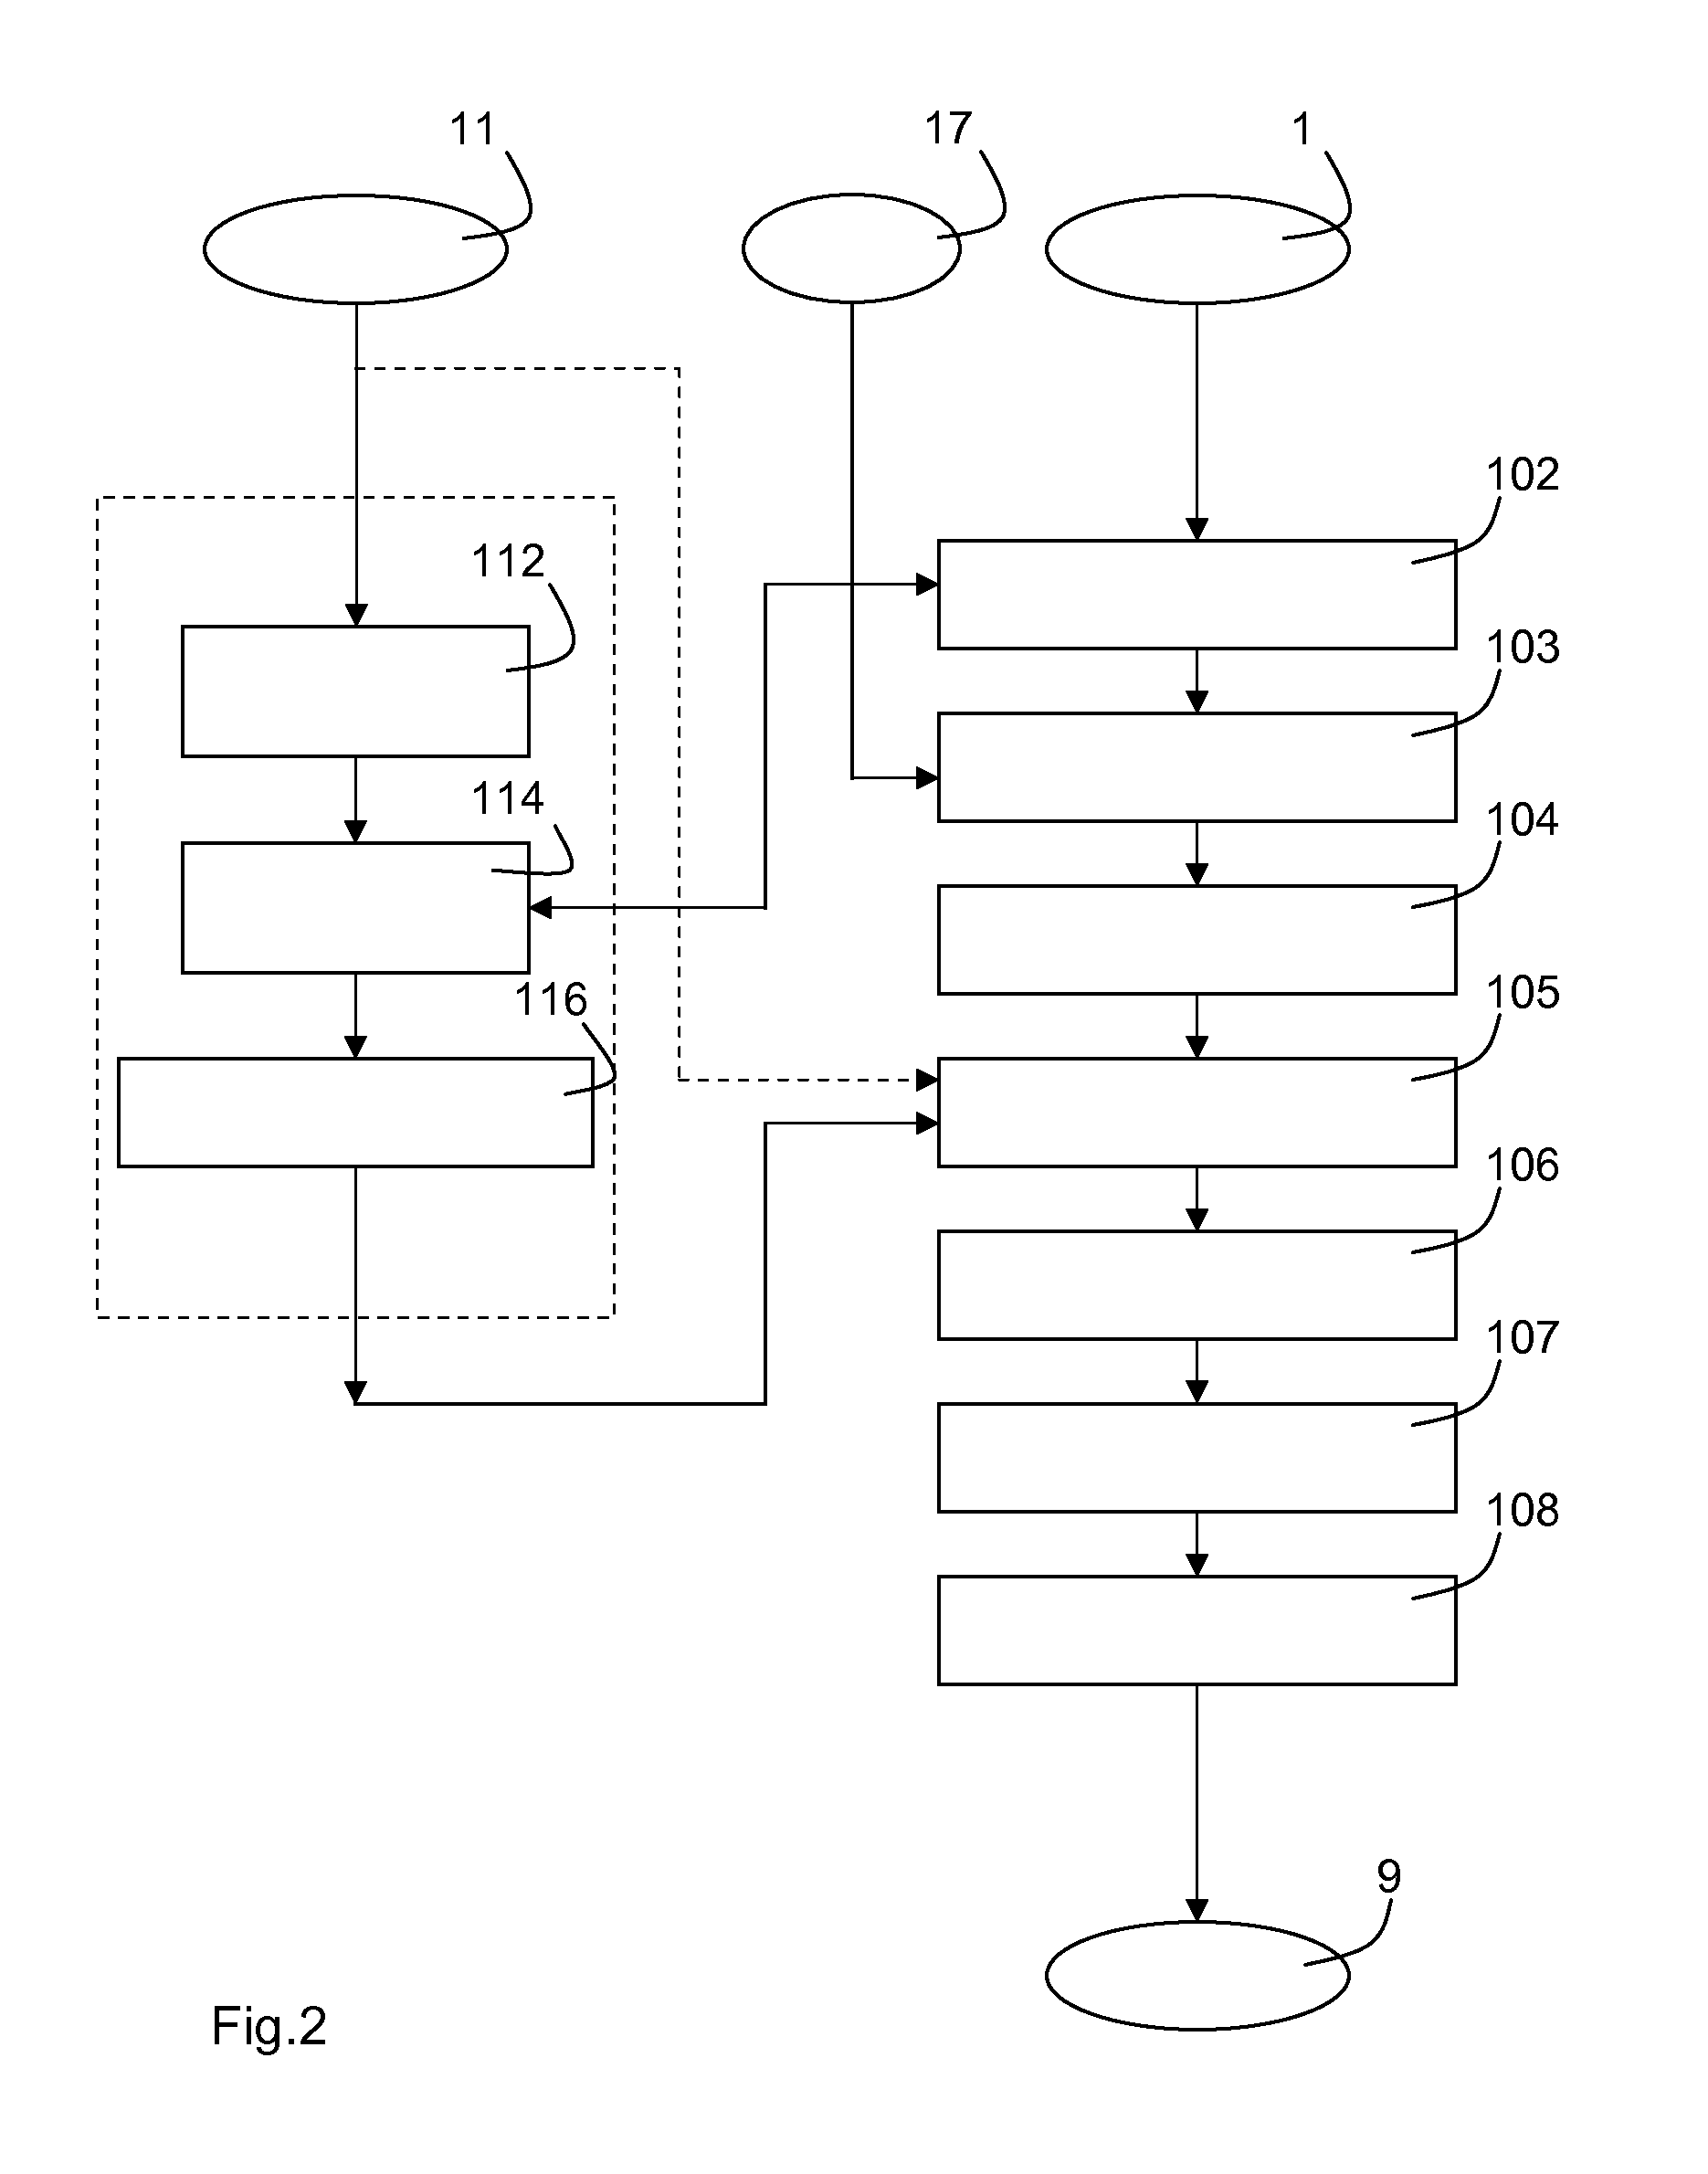 Layout modification engine for modifying a circuit layout comprising fixed and free layout entities